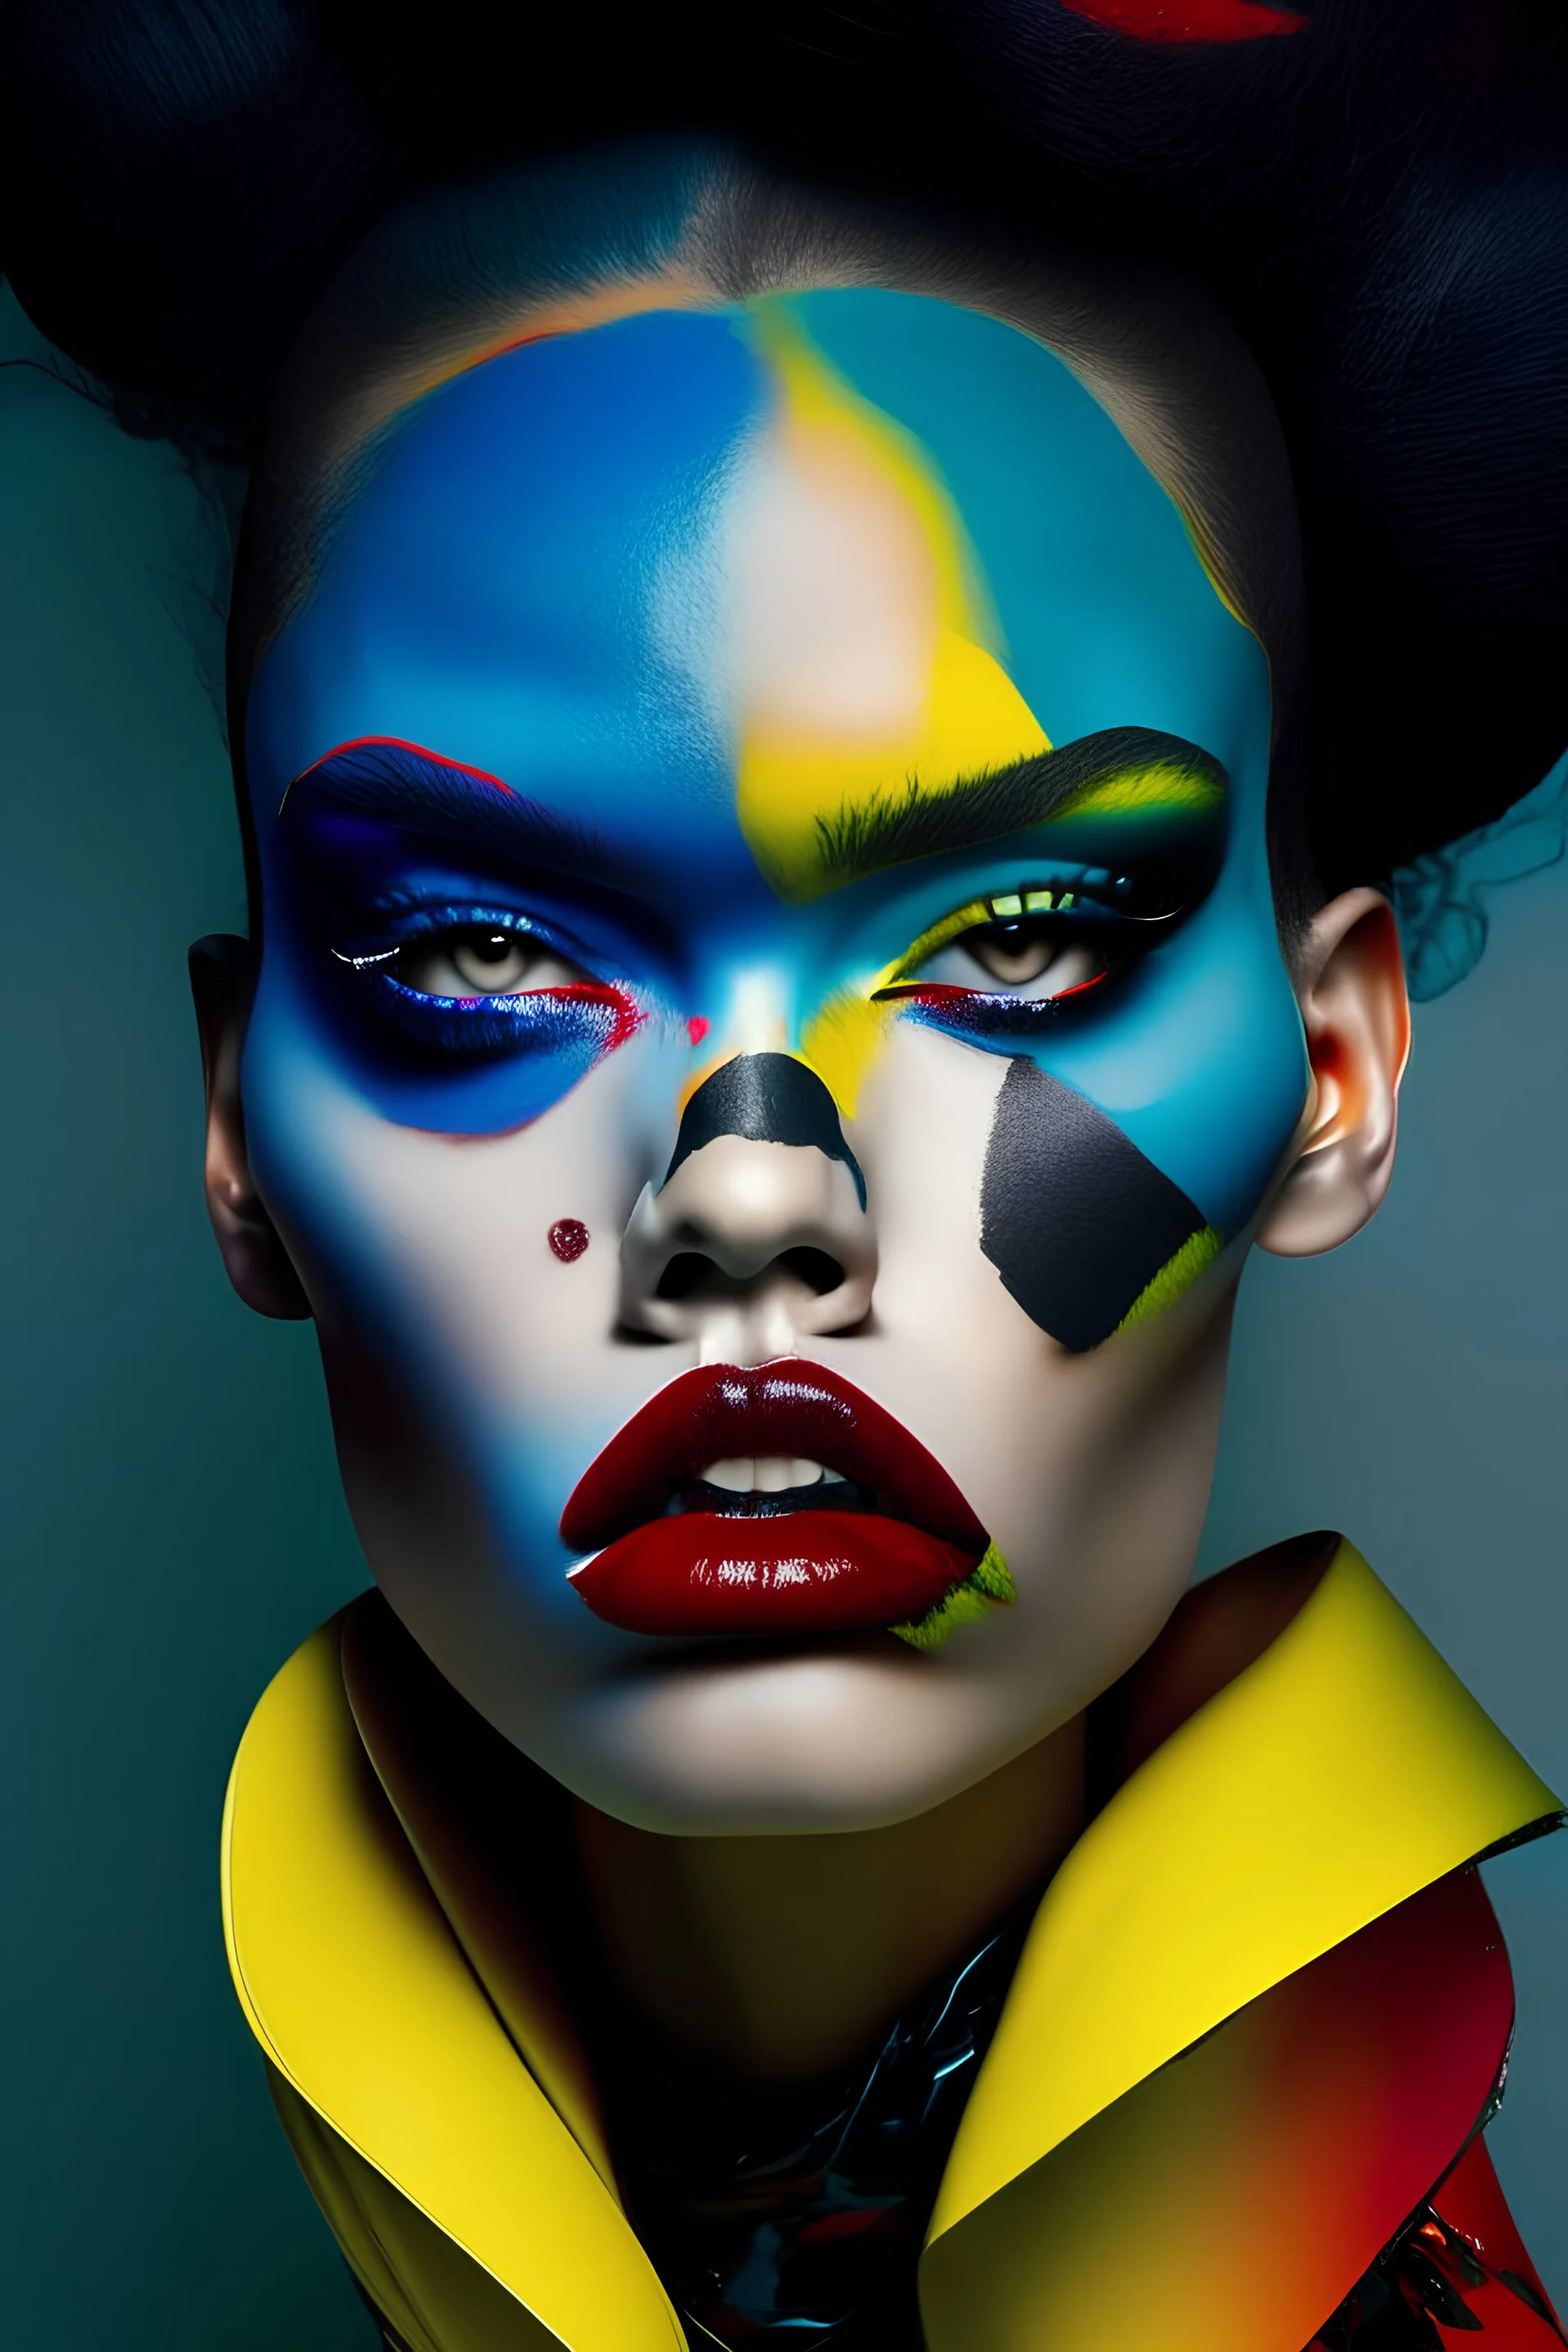 A striking portrait of an avant-garde fashion model, showcasing a bold, experimental outfit and makeup, challenging conventional beauty norms and pushing boundaries.